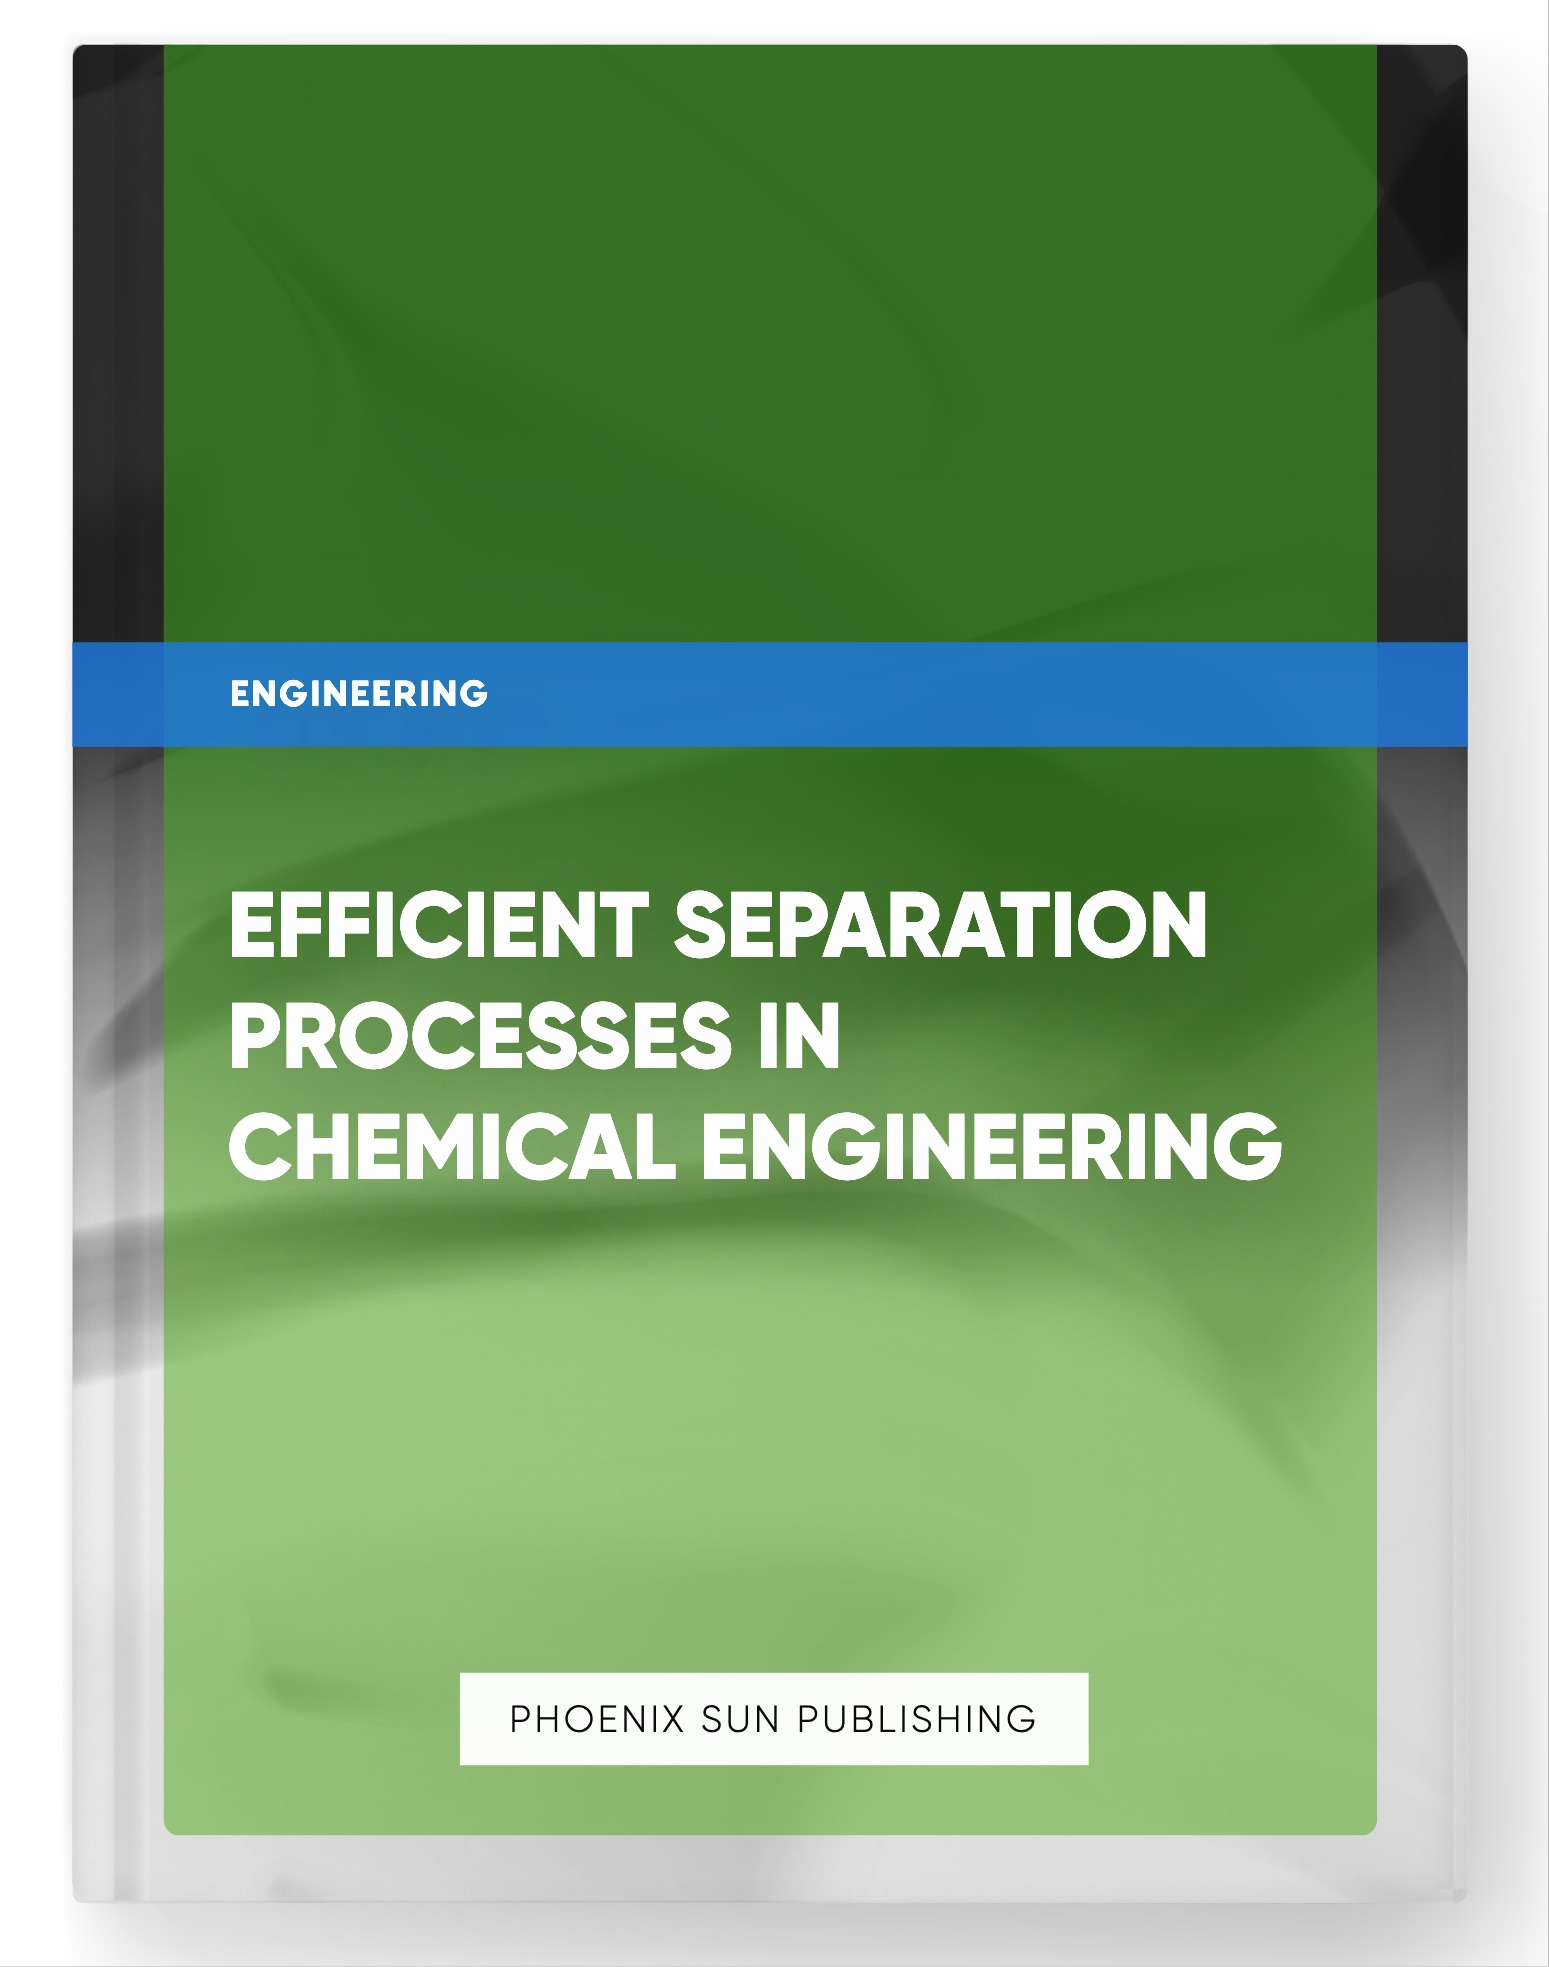 Efficient Separation Processes in Chemical Engineering